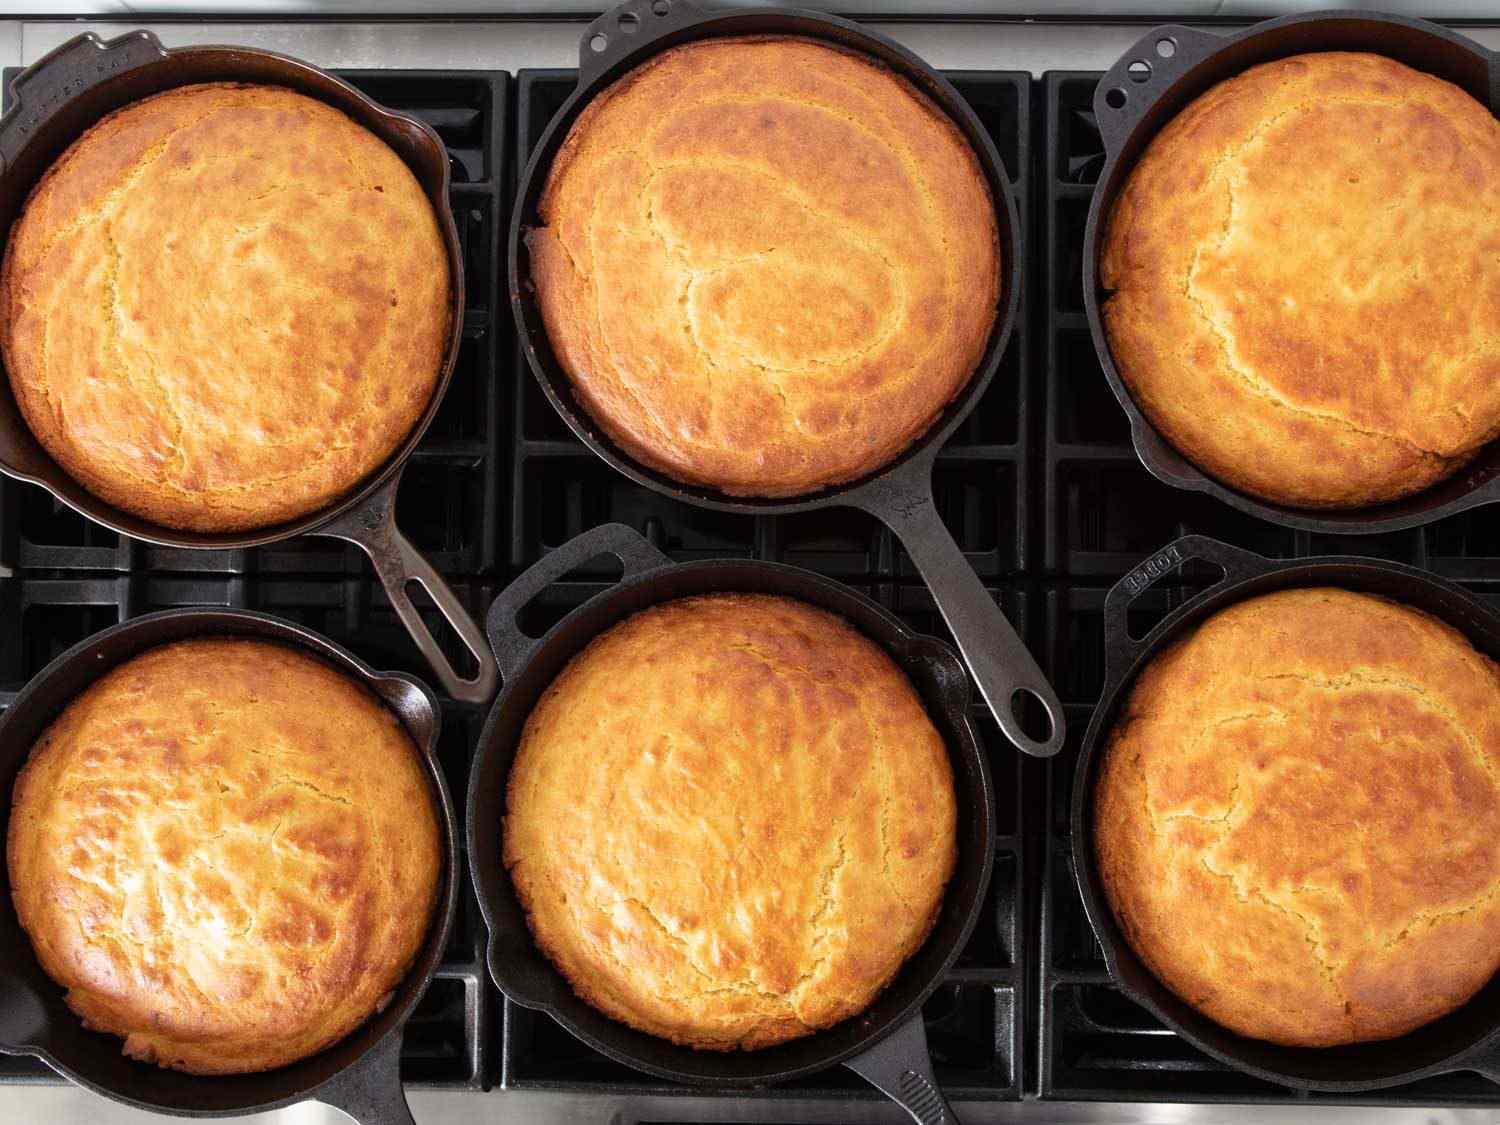 An overhead shot of several cast iron skillets, each containing golden brown cornbread; the differences from skillet to skillet were impossible to discern.